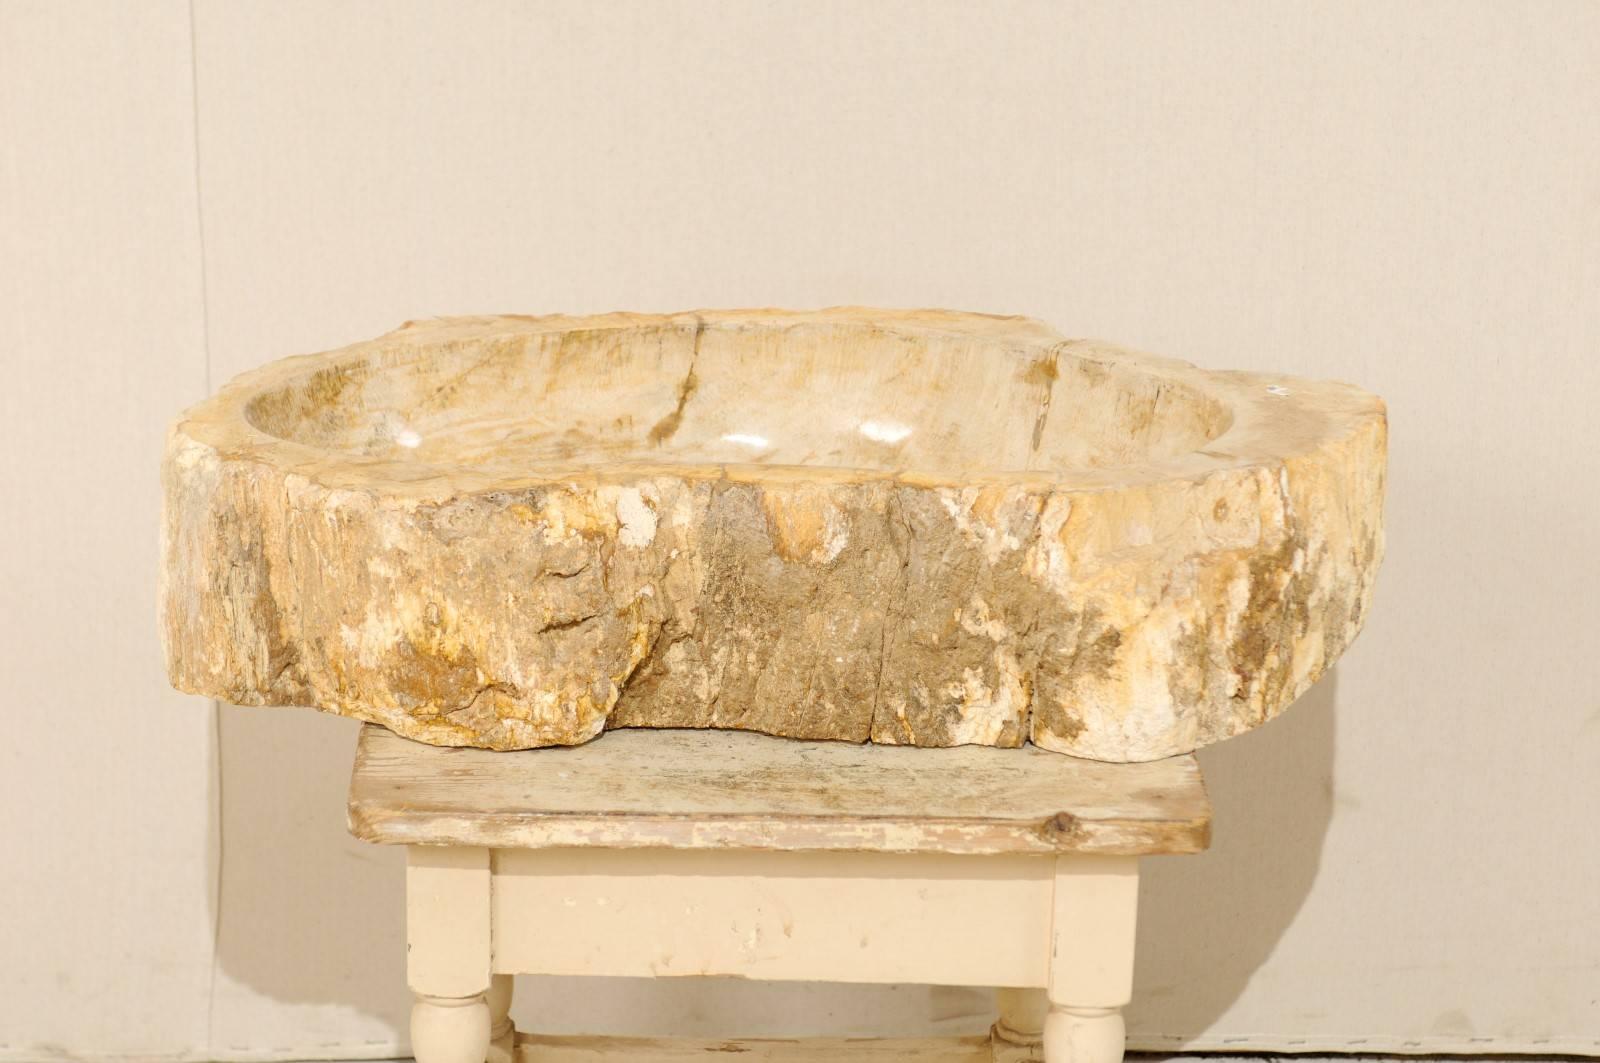 Polished Petrified Wood Sink with Rustic Oblong Shape in Warm Cream & Beige 2